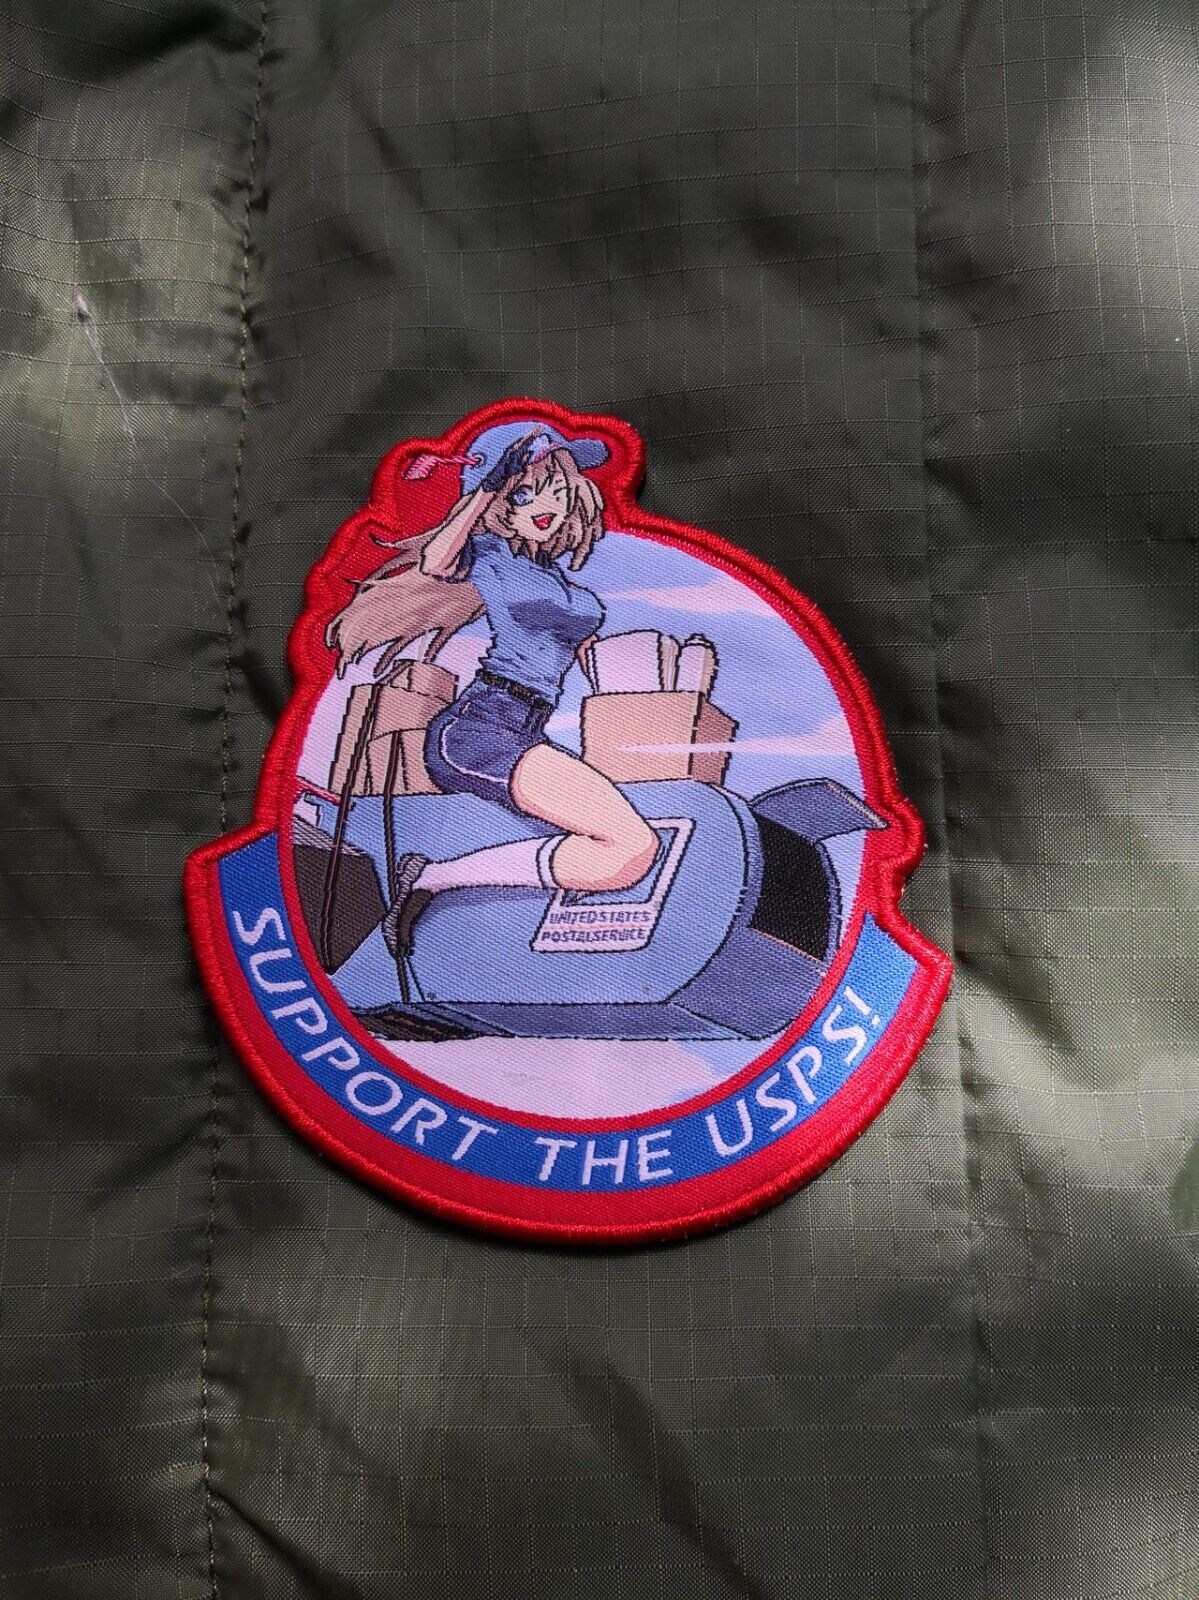 Post Office Support & Mail Call (USPS) anime airsoft fun morale Delivery Patch